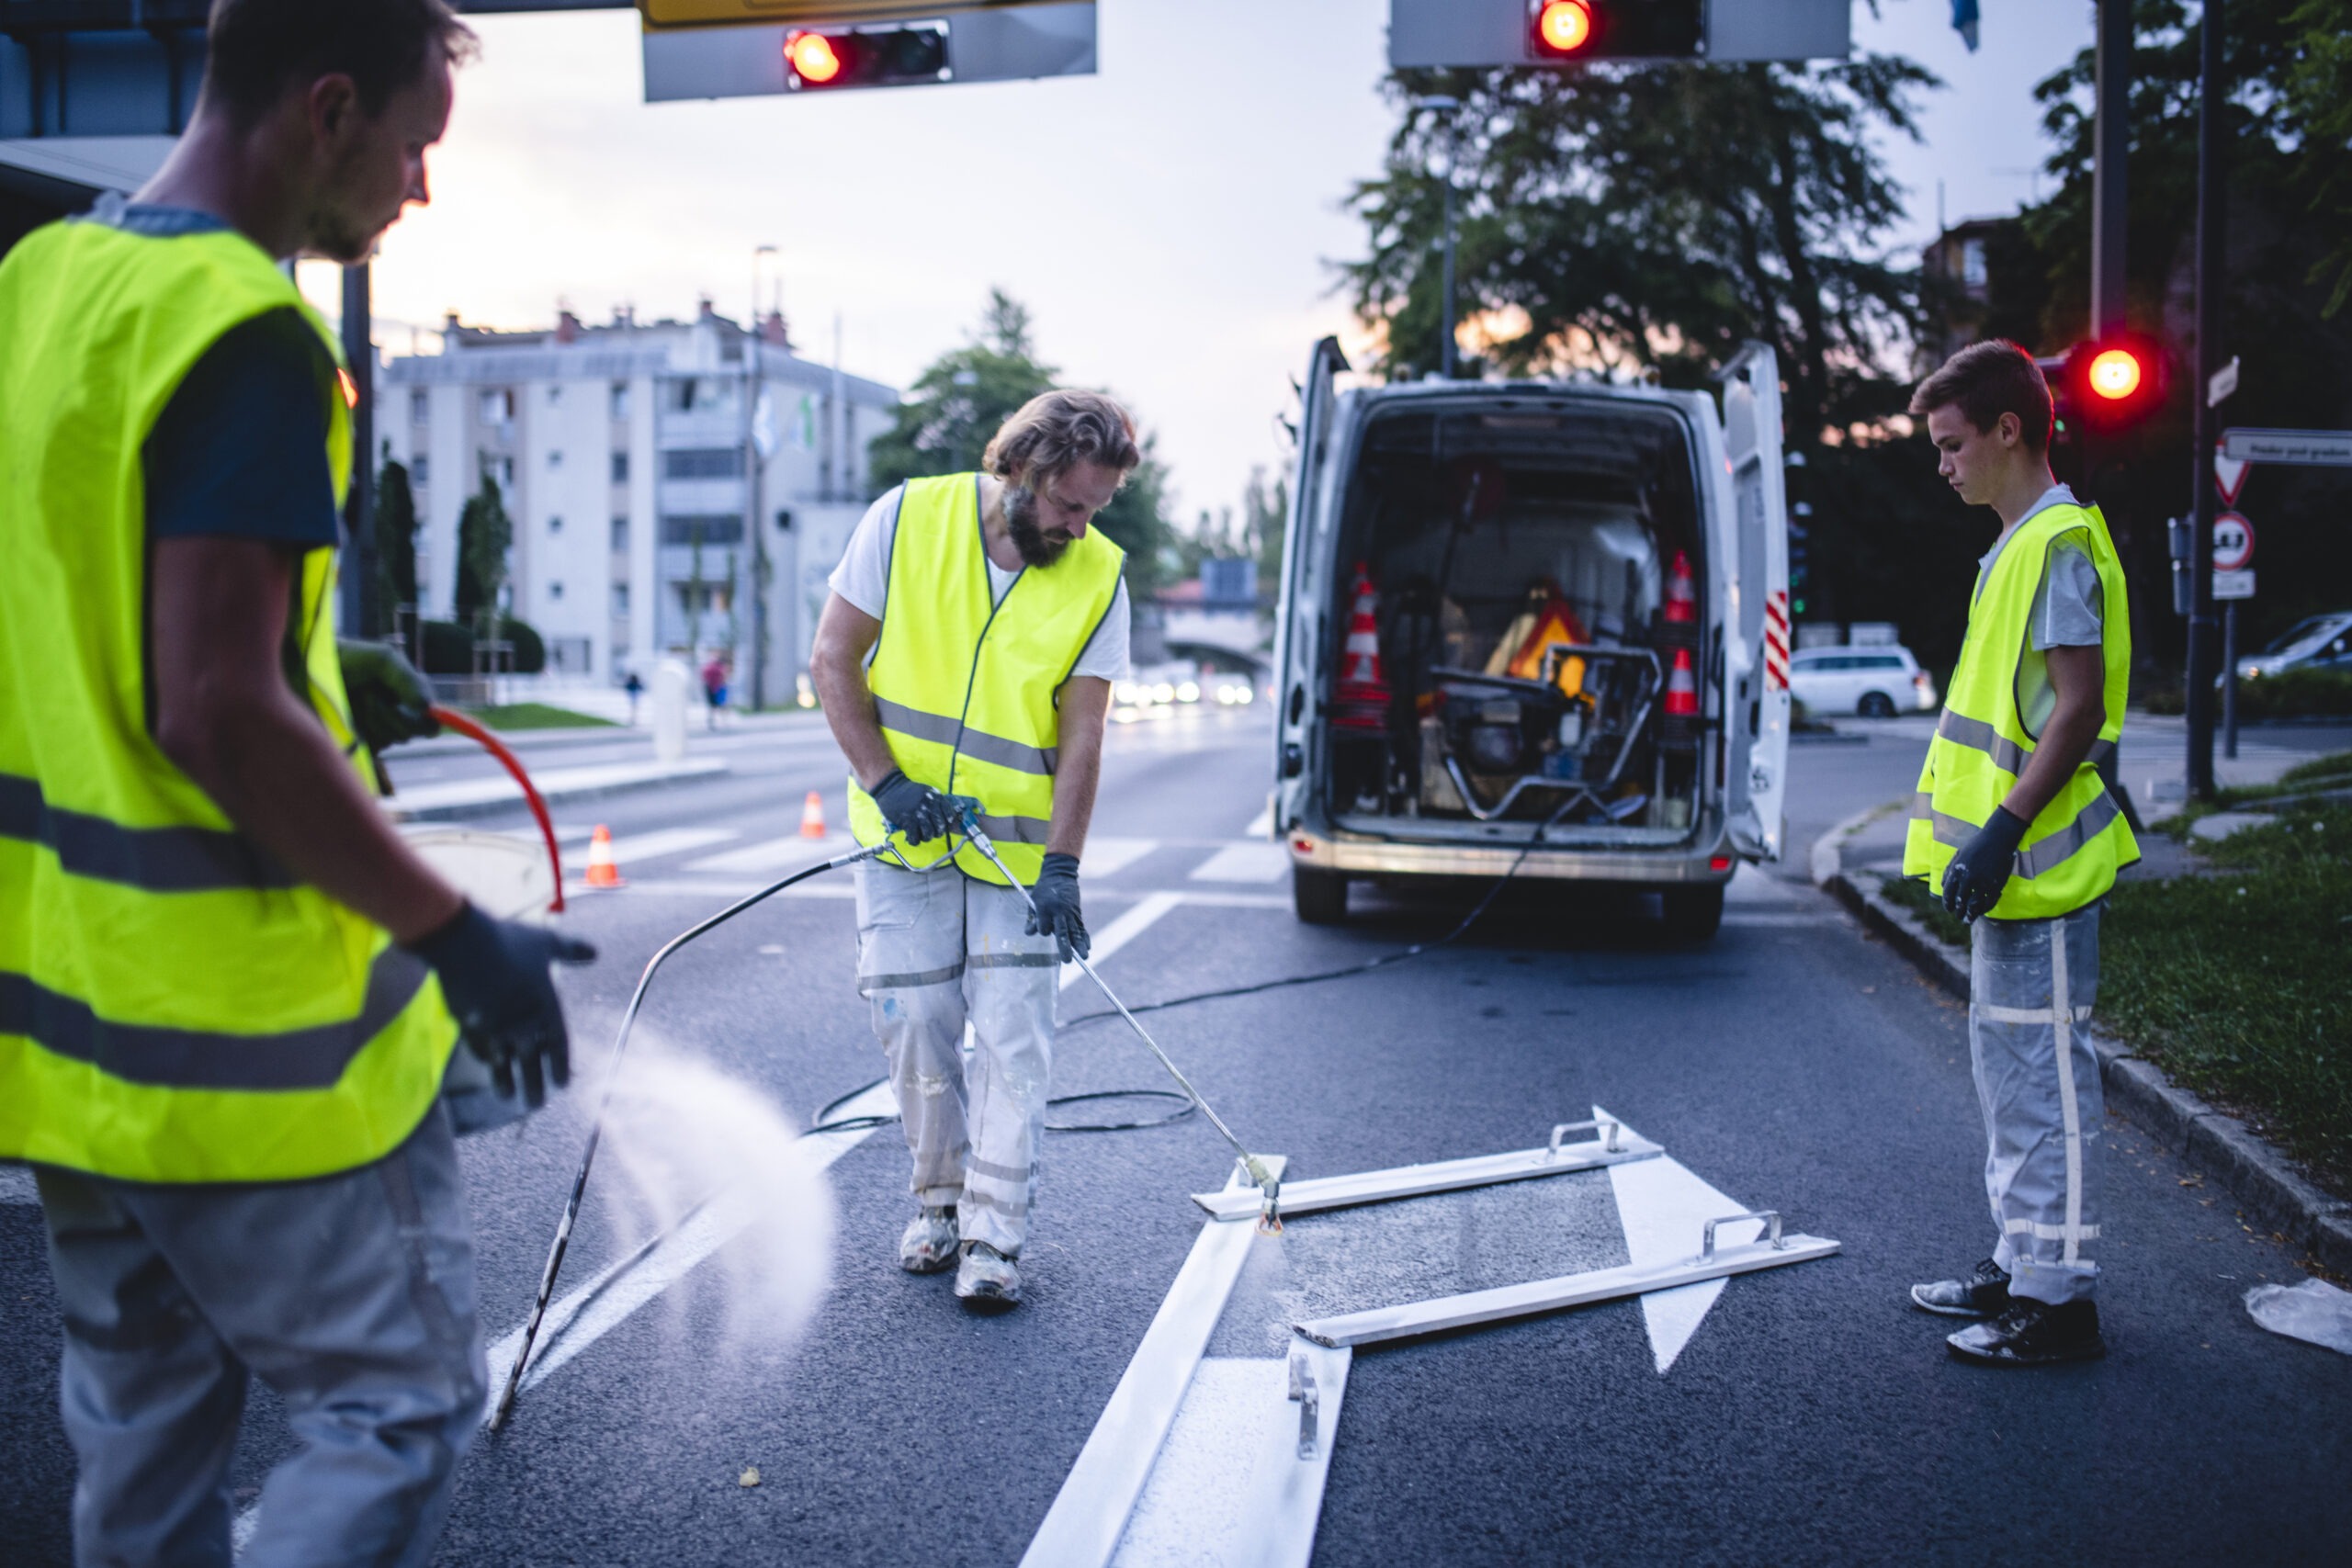 Three-man construction crew in reflective vests spray painting turn arrow marking in Central European capital city.